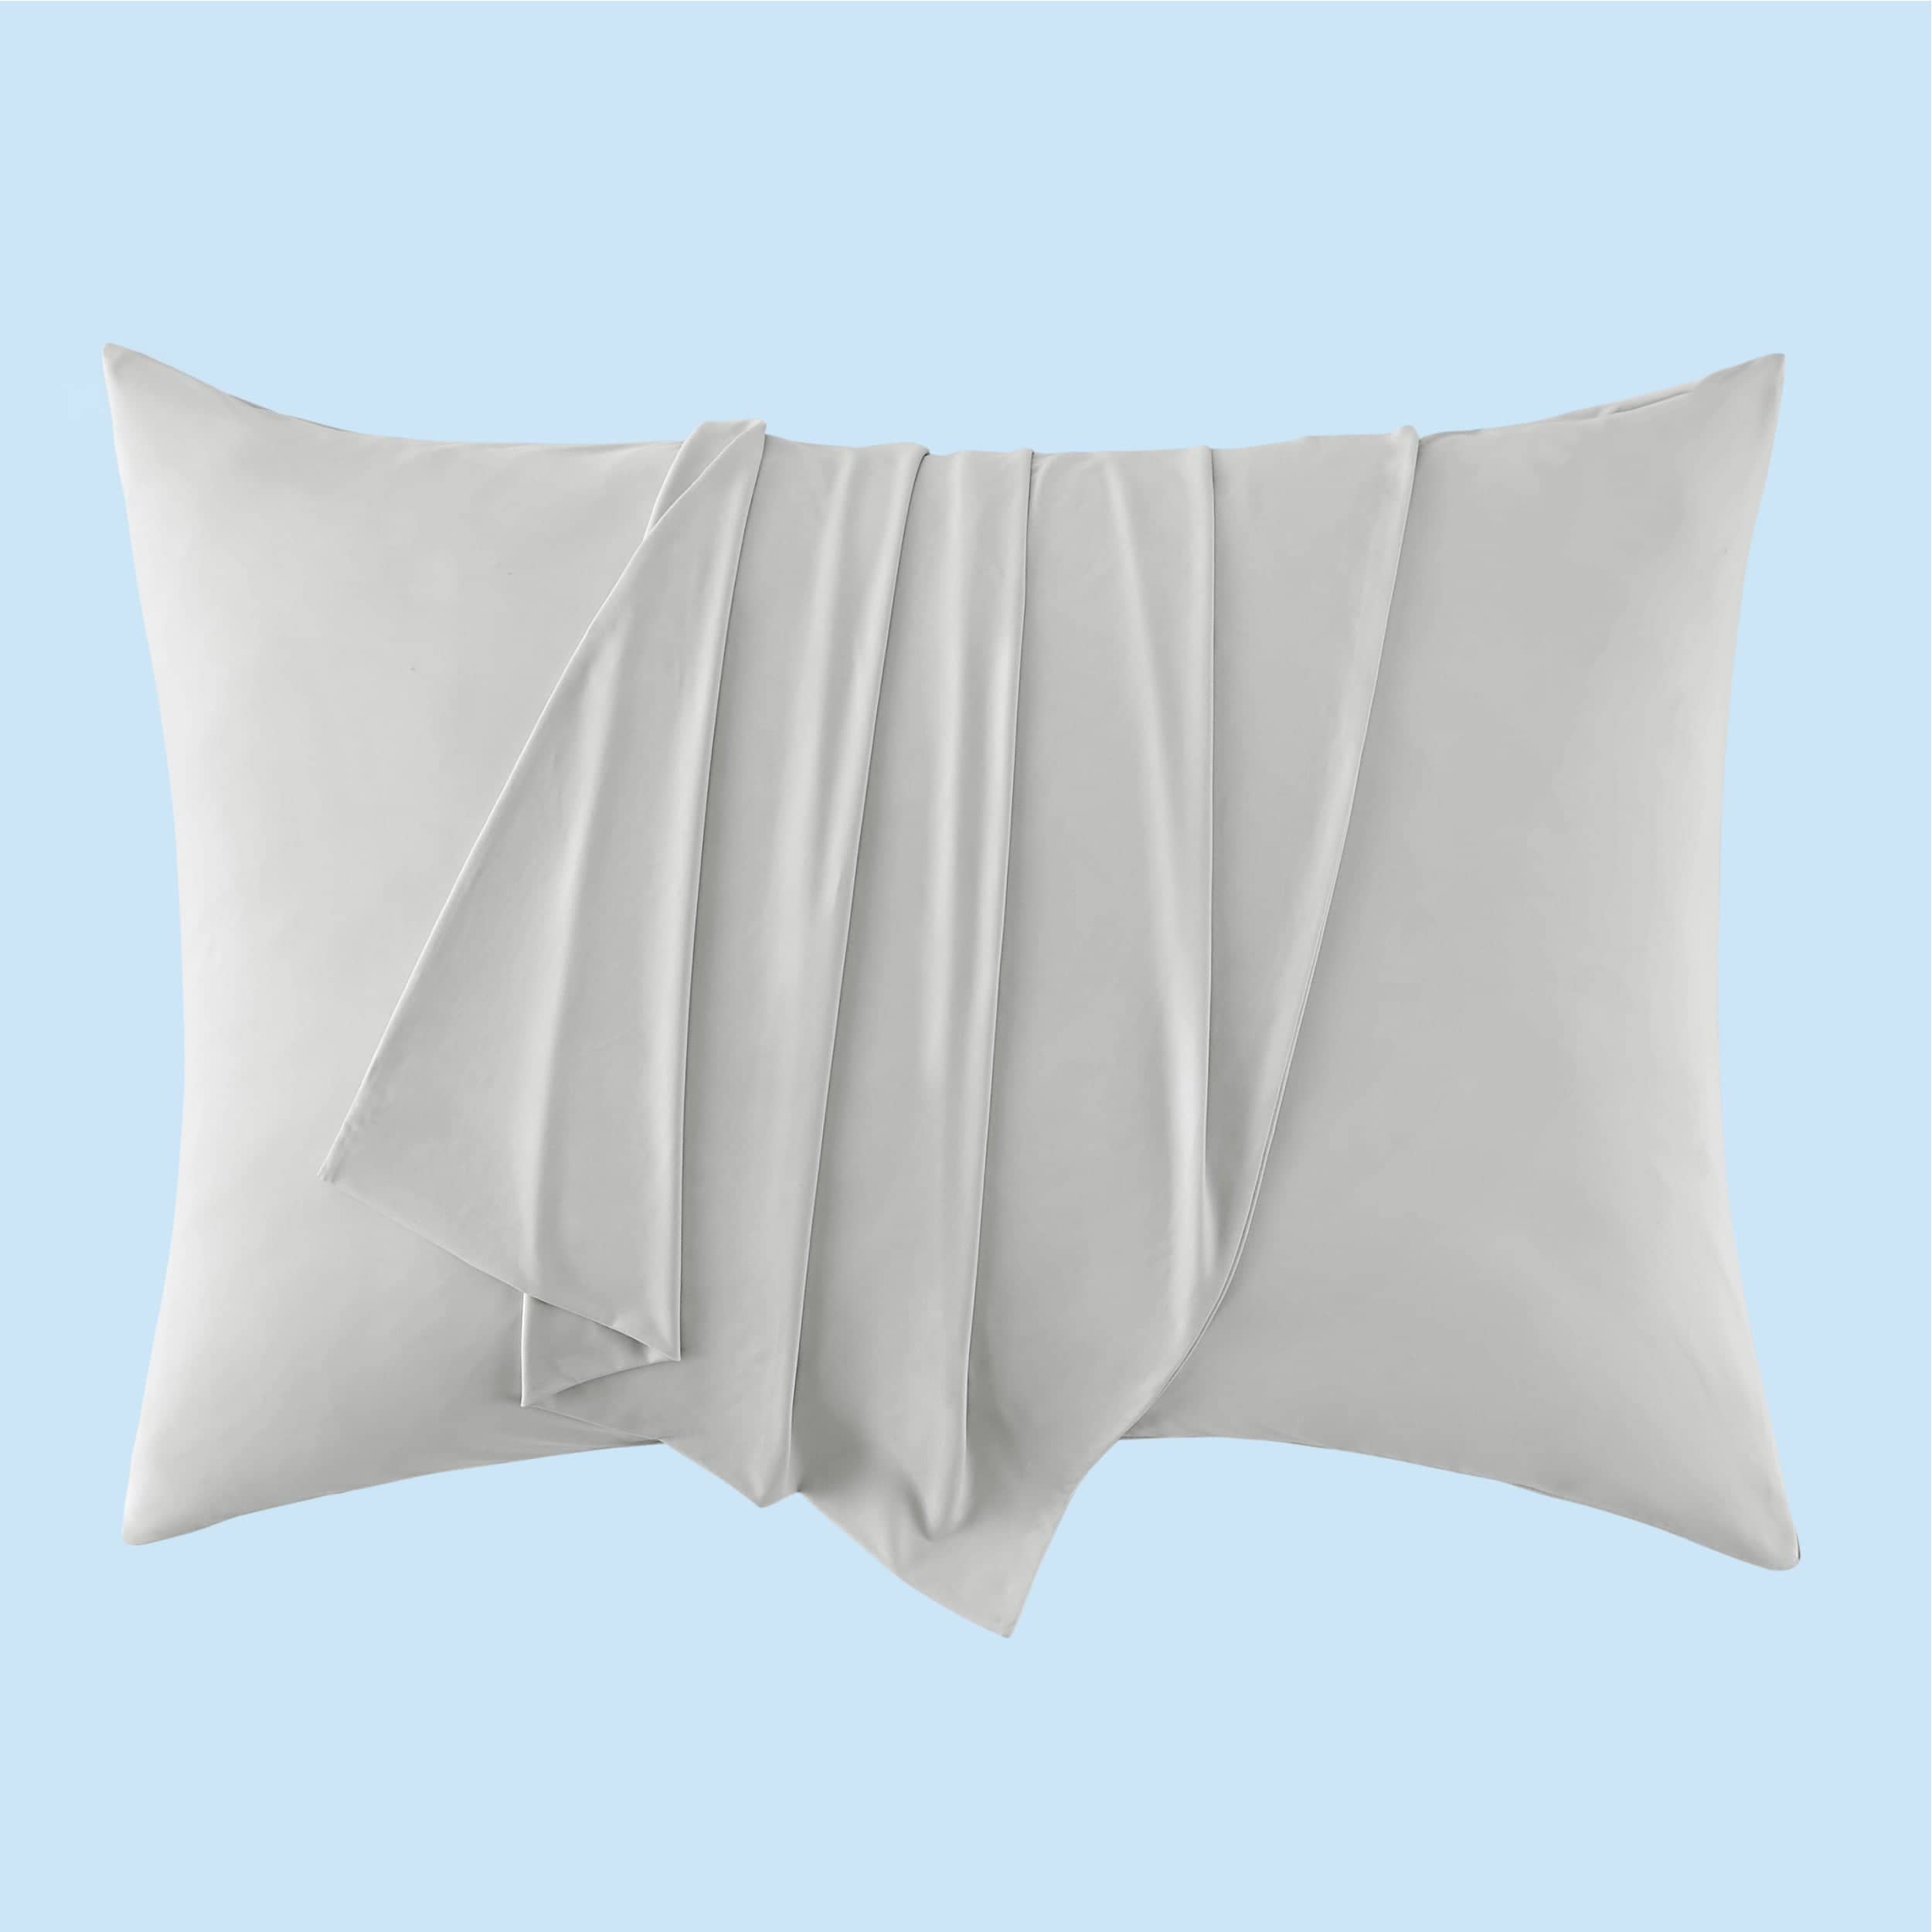 Bedsure Breescape Cooling Pillow Cases for Hot Sleepers